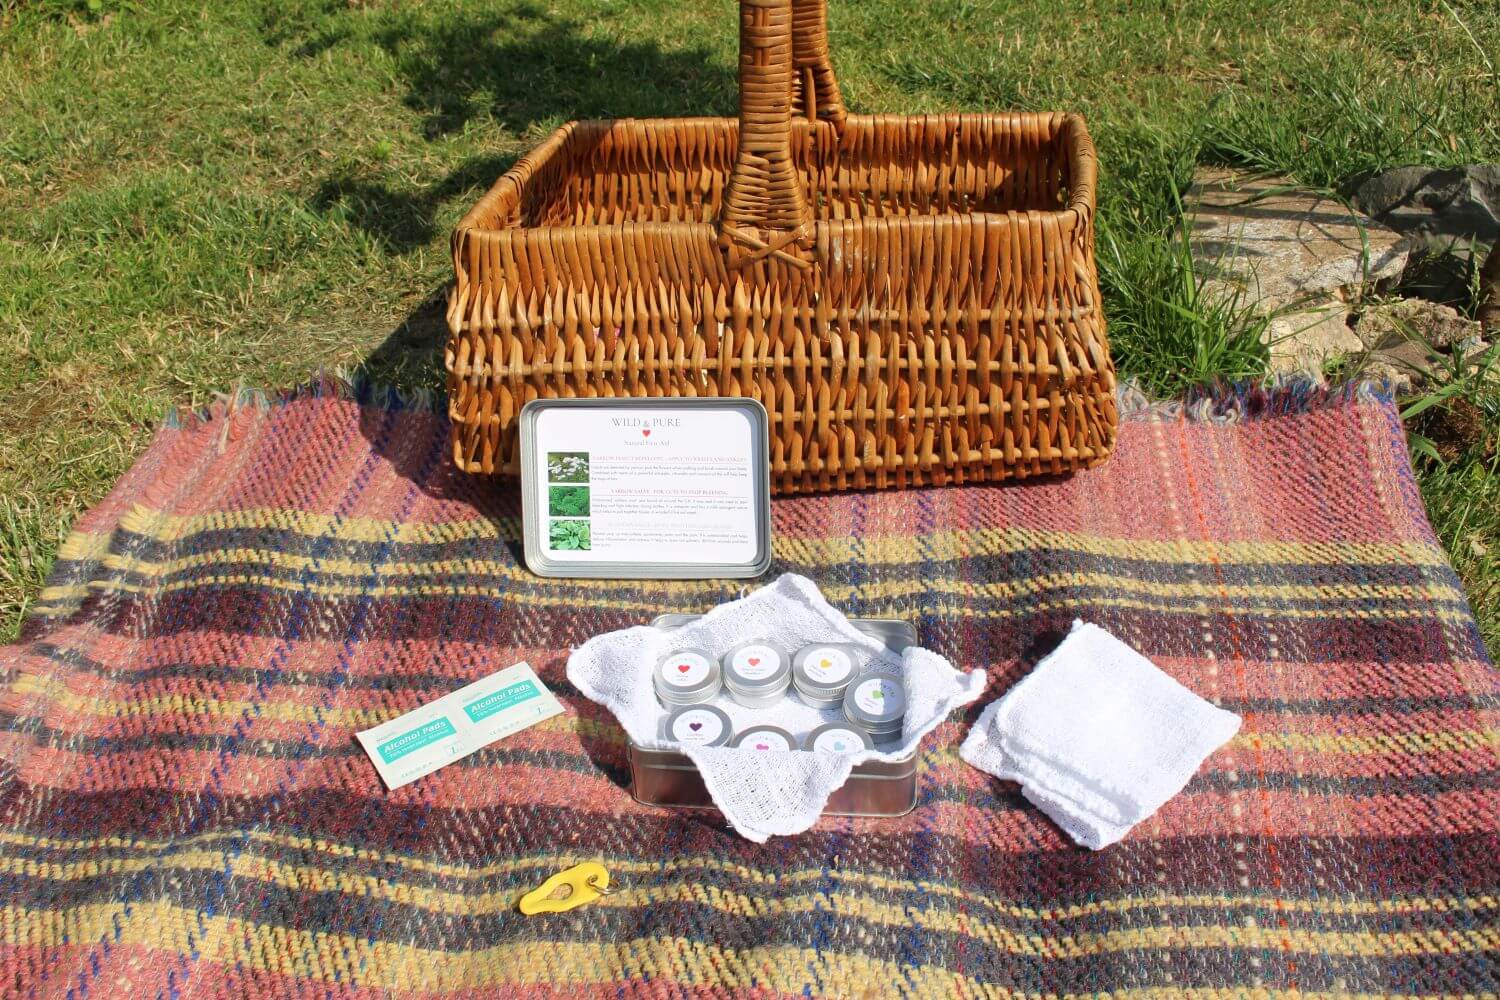 Elaine shows off her natural balms on a picnic blanket 